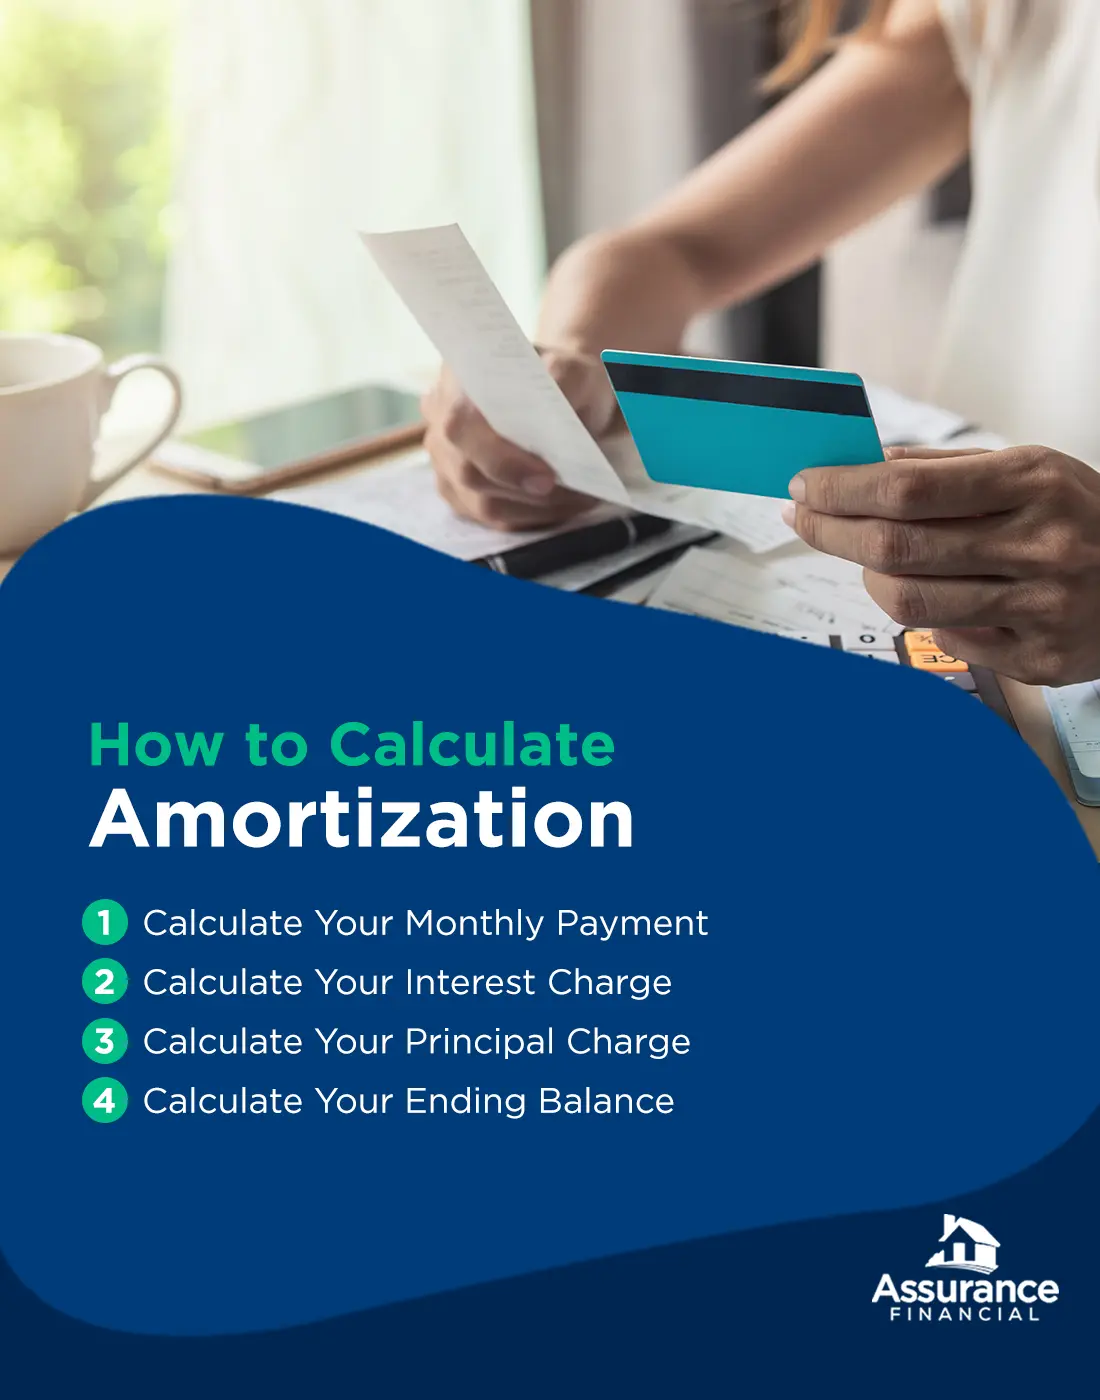 How to Calculate Amortization